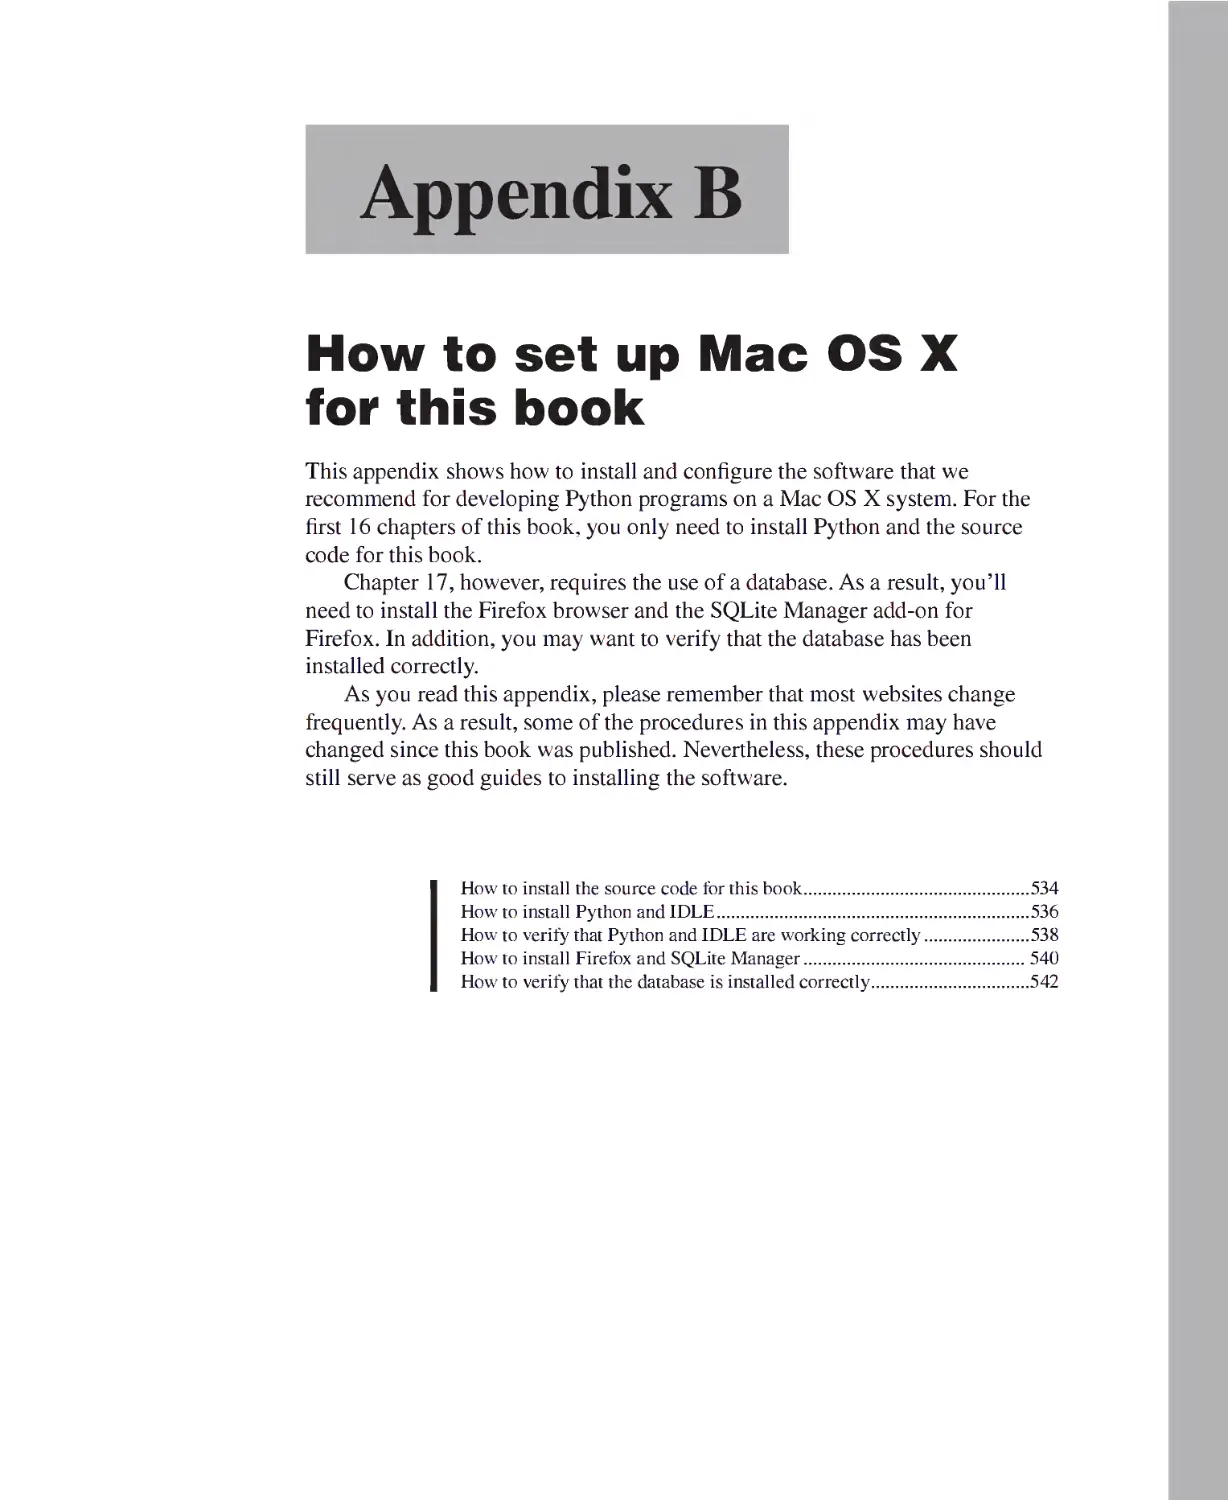 Appendix B - How to Set Up Mac OS X for This Book